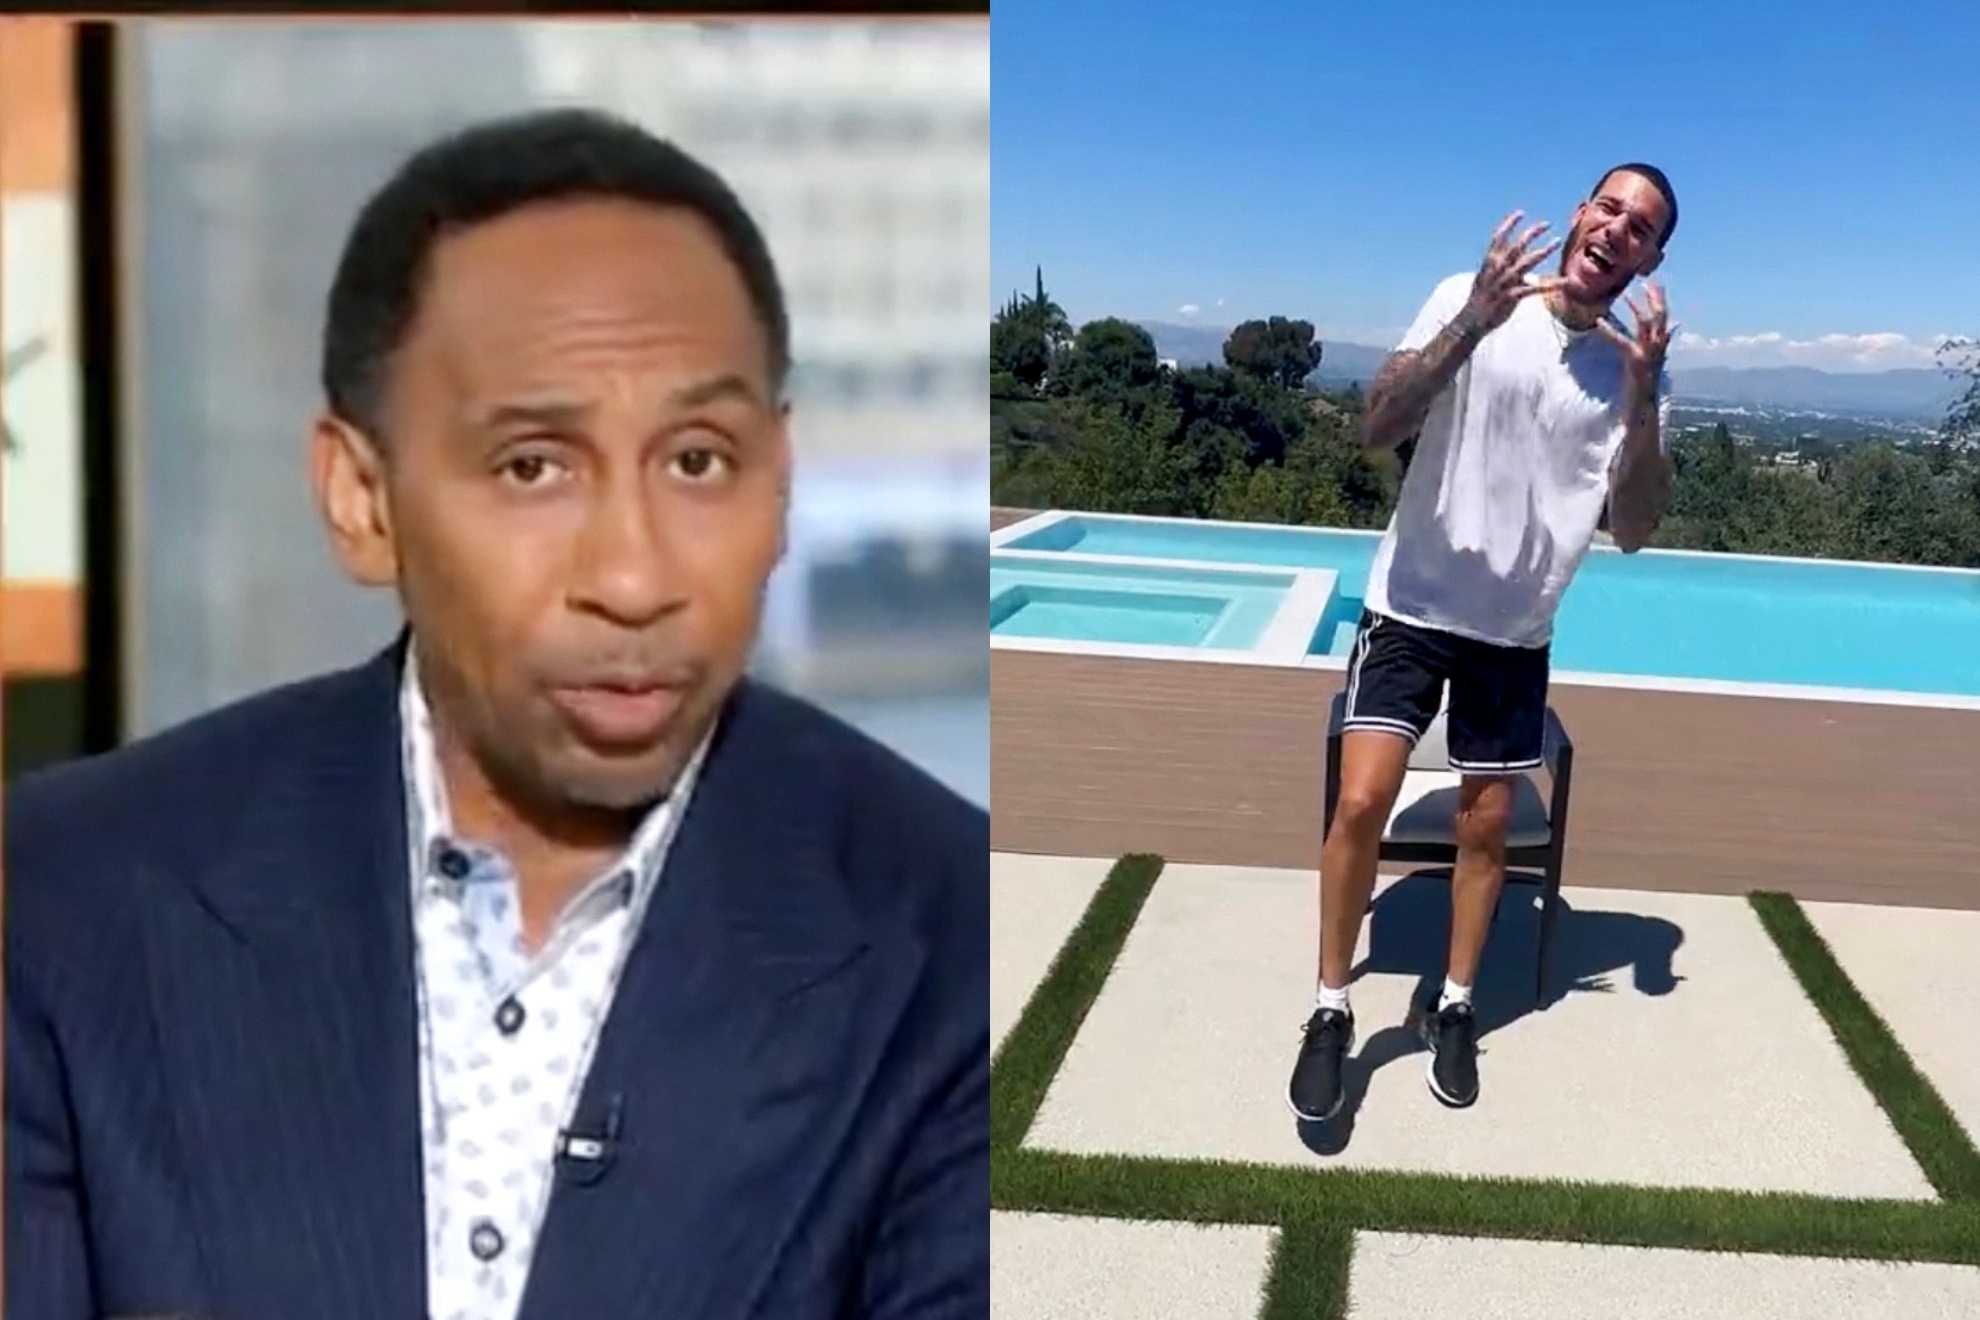 Stephen A. Smith and Lonzo Ball went back and forth on social media.